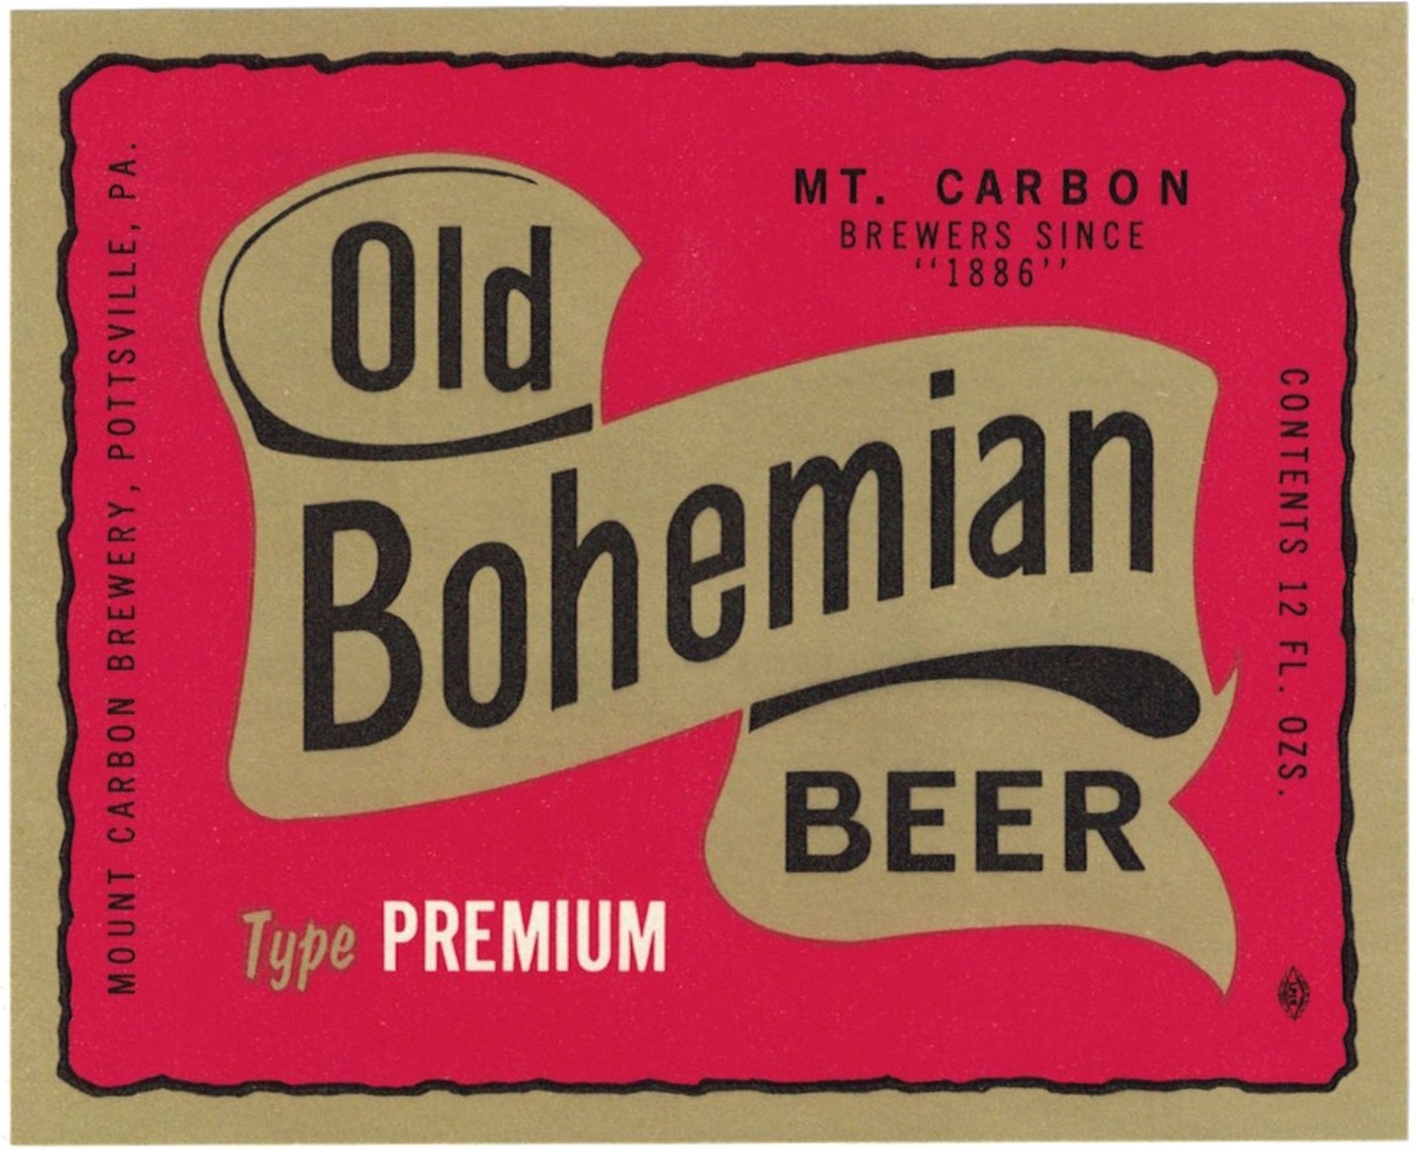 Labels span. Stroh Bohemian Style Beer. Old Bohemia Beer банка 1994 года цена.